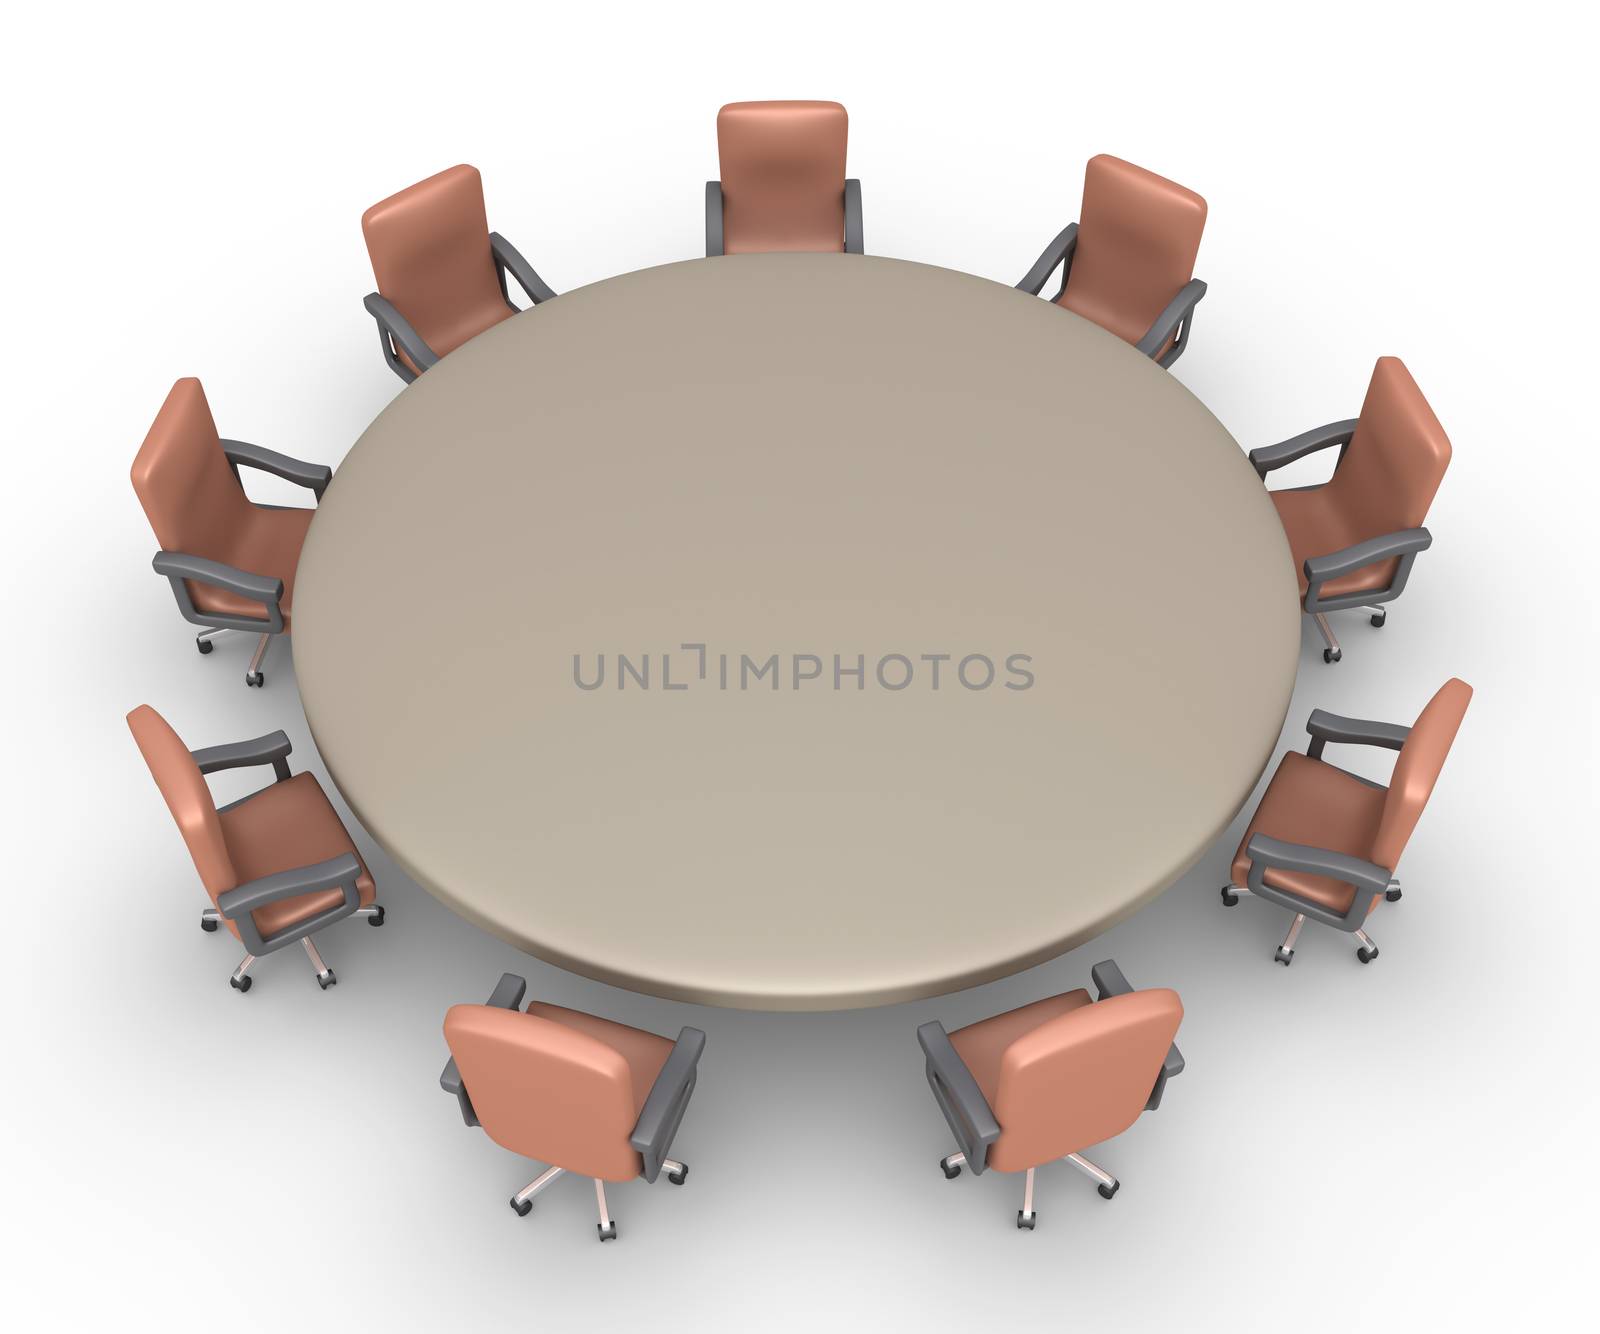 Chairs around a table ready for a meeting by 6kor3dos